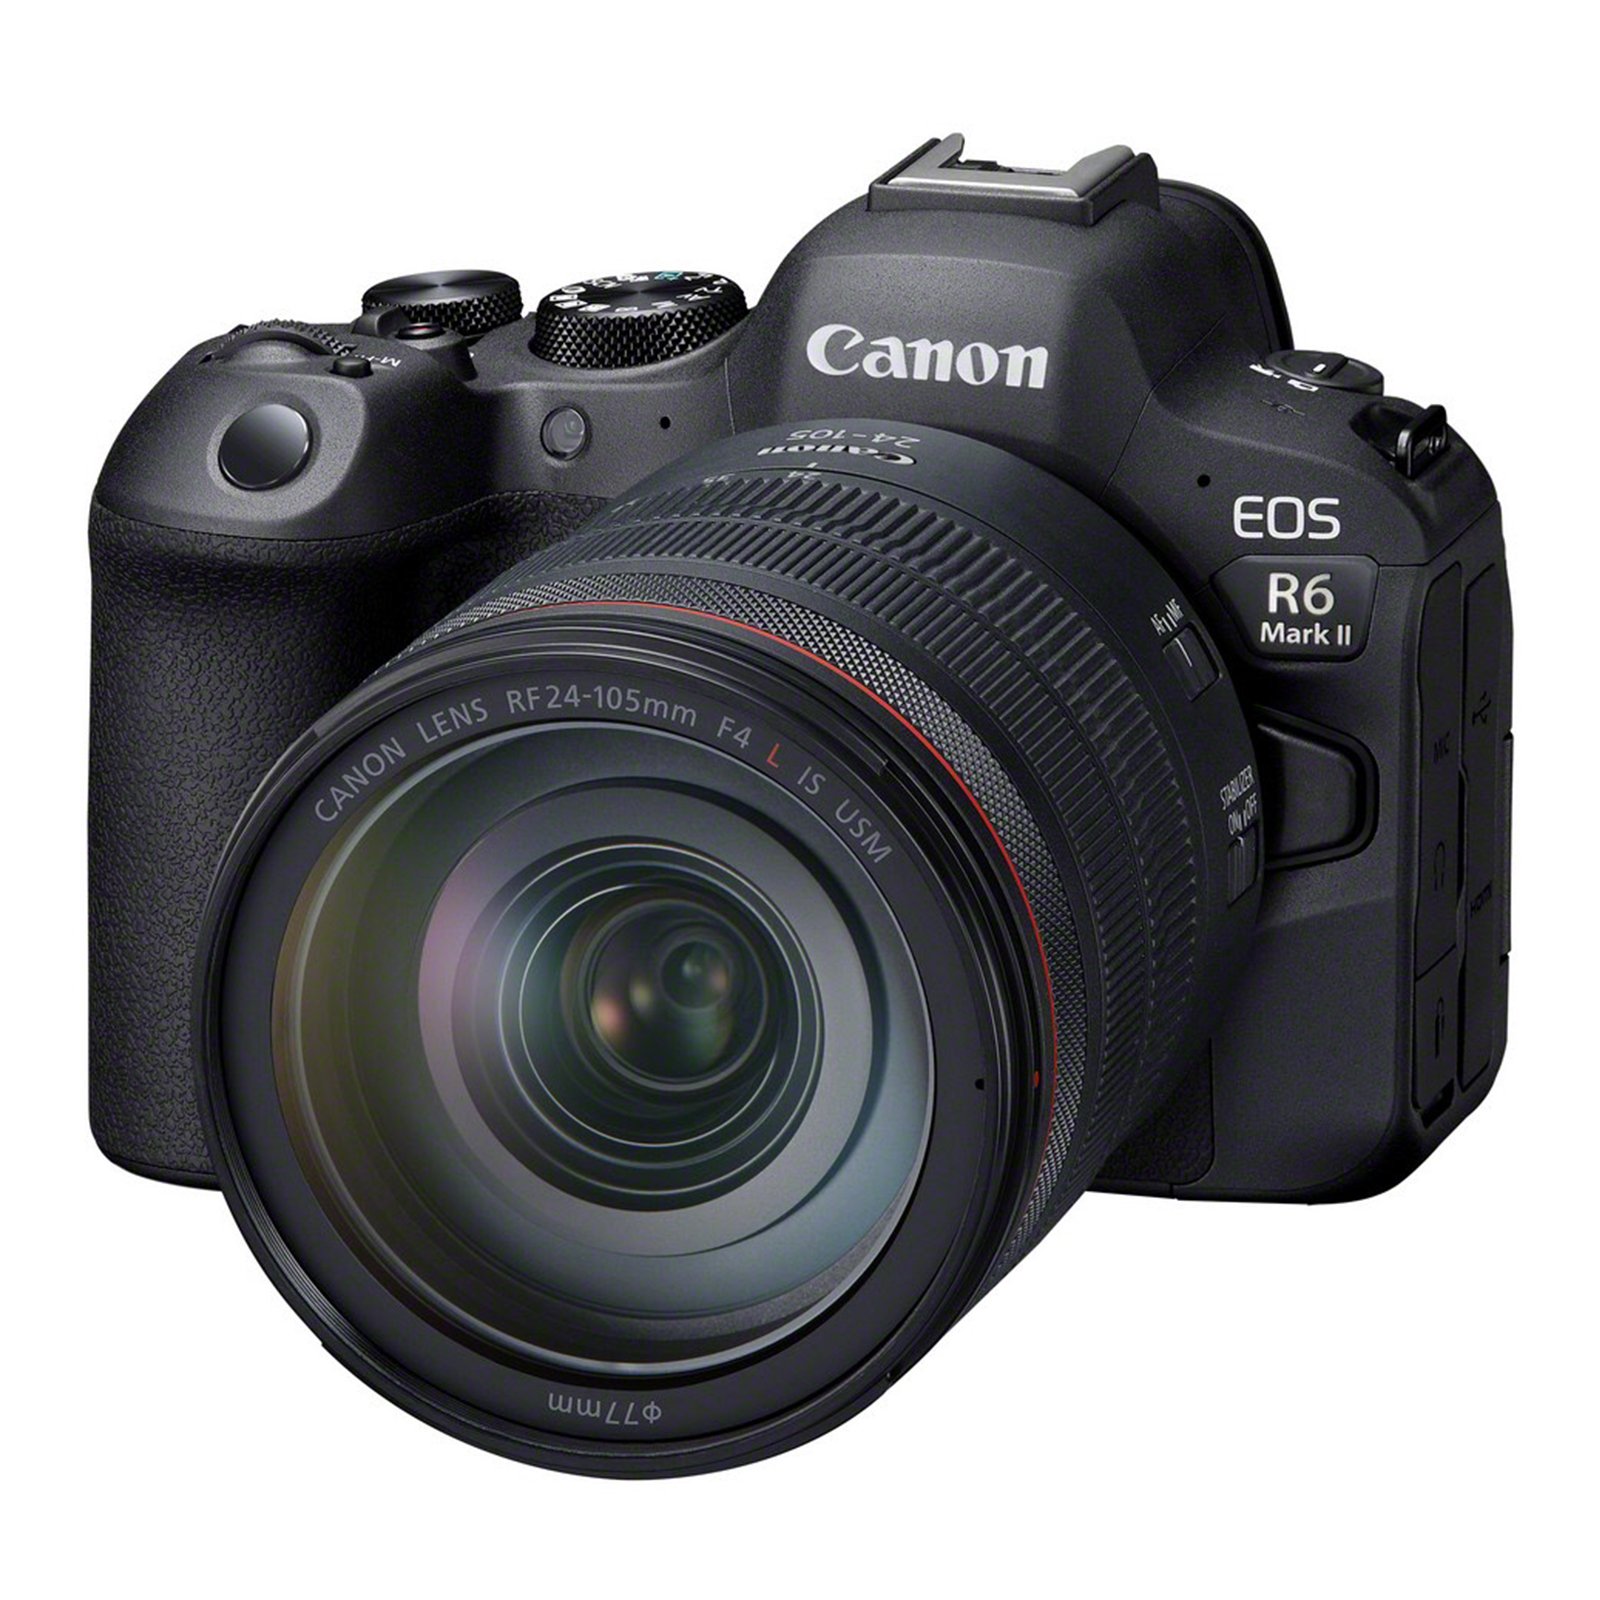 Image of Canon EOS R6 Mark II Digital Camera with 24105mm f4 L Lens